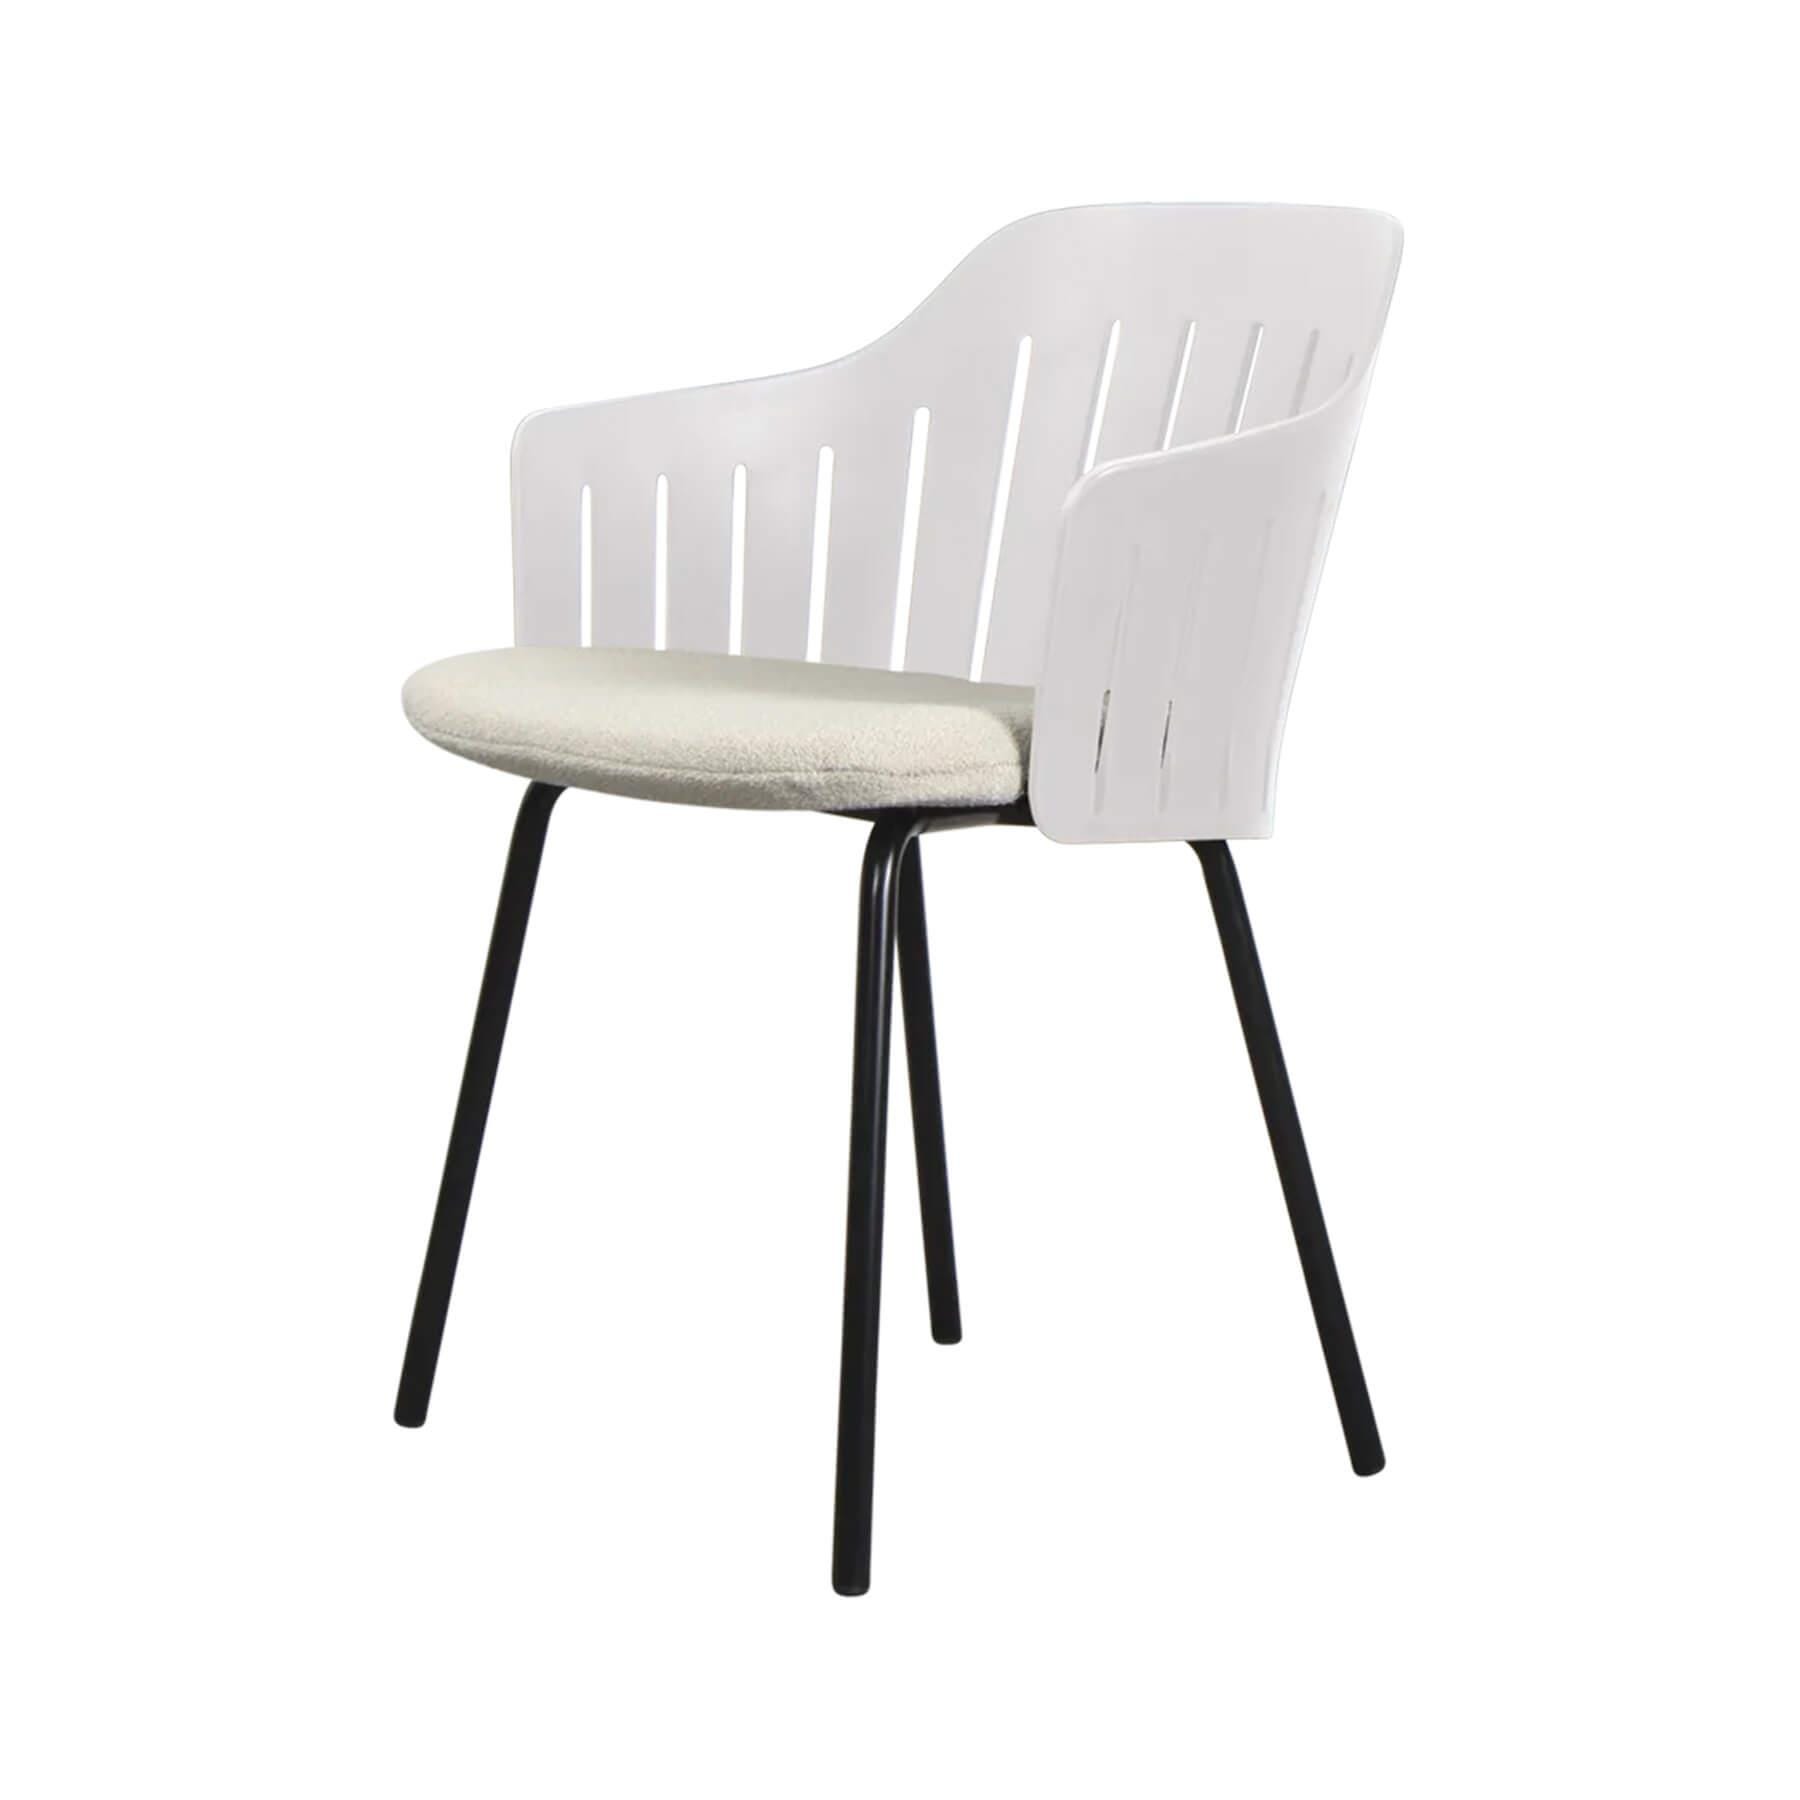 Caneline Choice Outdoor Chair With Steel Legs White Seat Sand Cushion